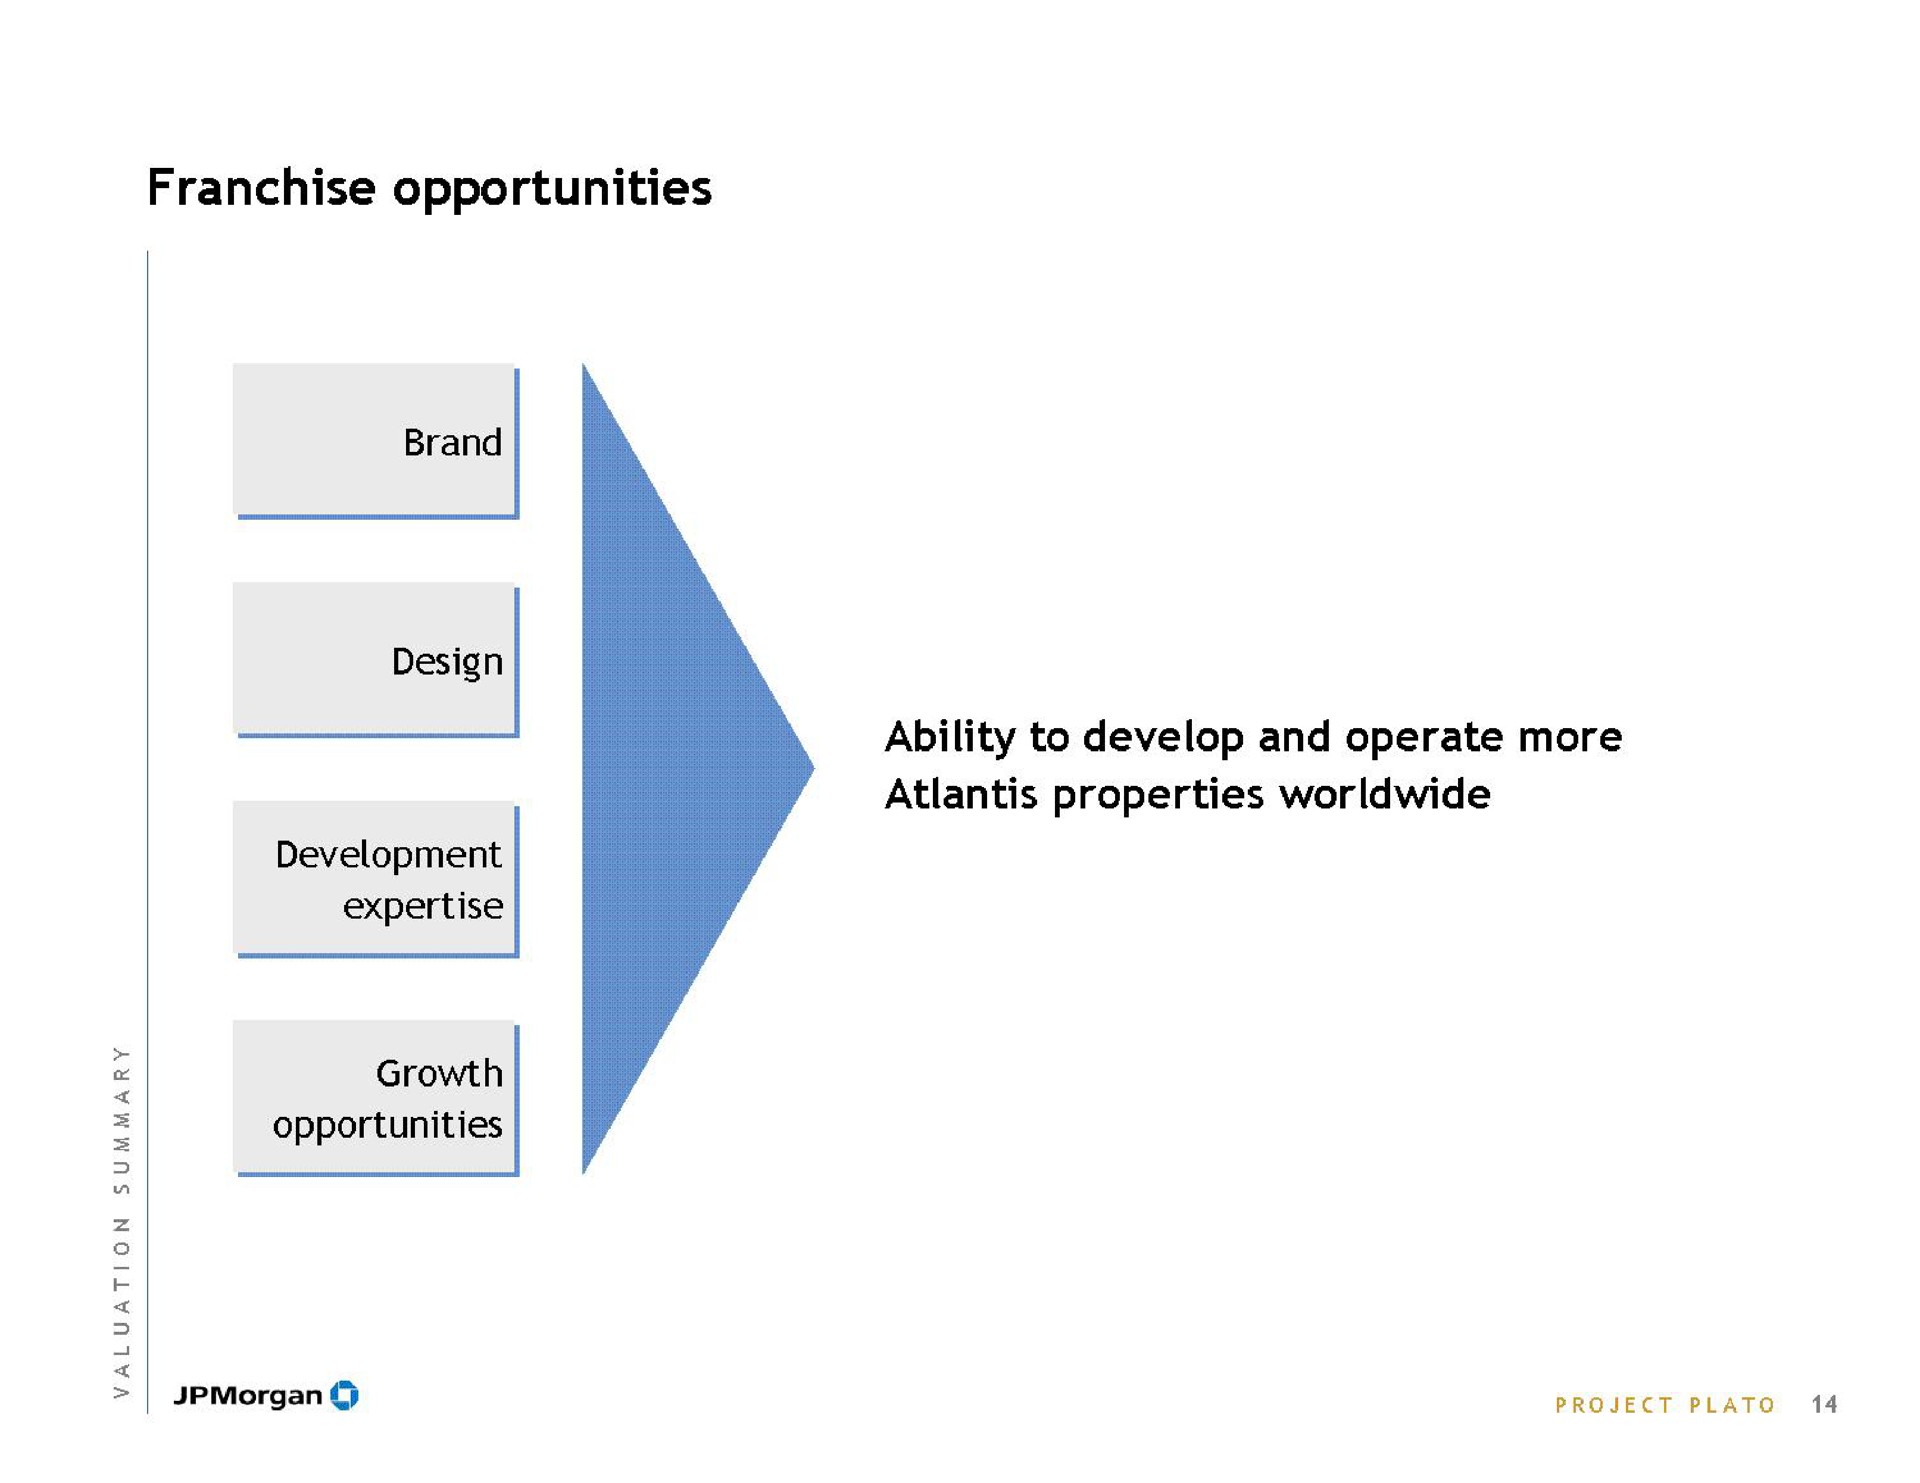 franchise opportunities brand design development growth opportunities ability to develop and operate more properties | J.P.Morgan